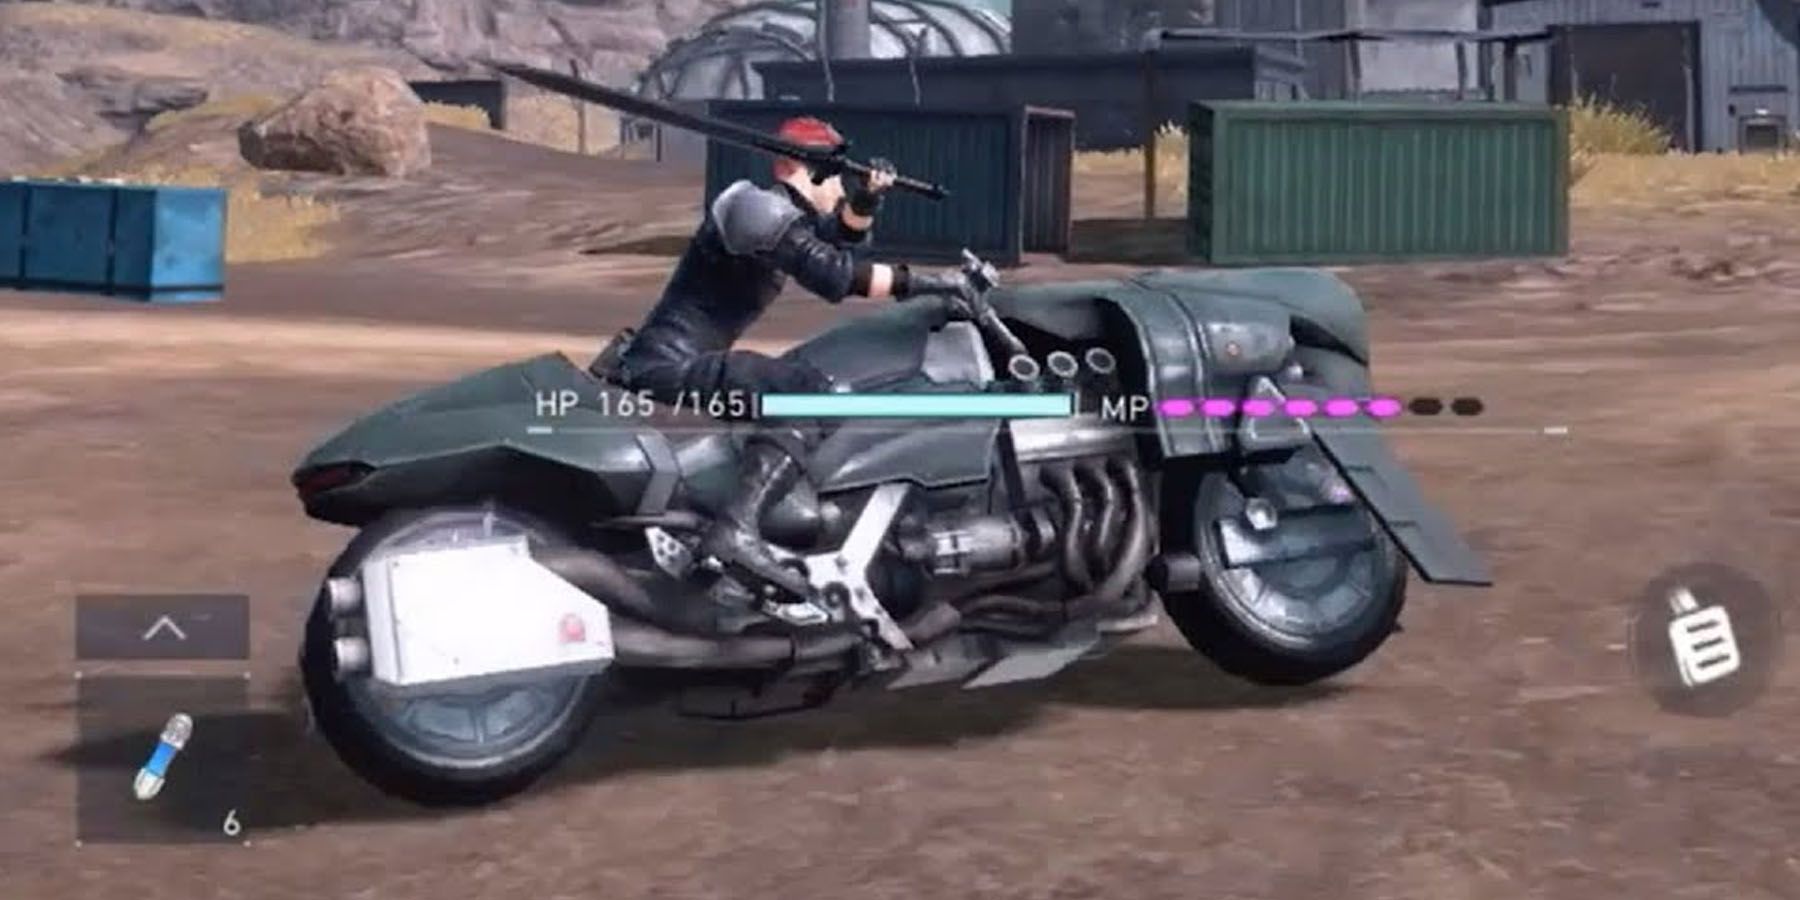 A player riding a motorcycle